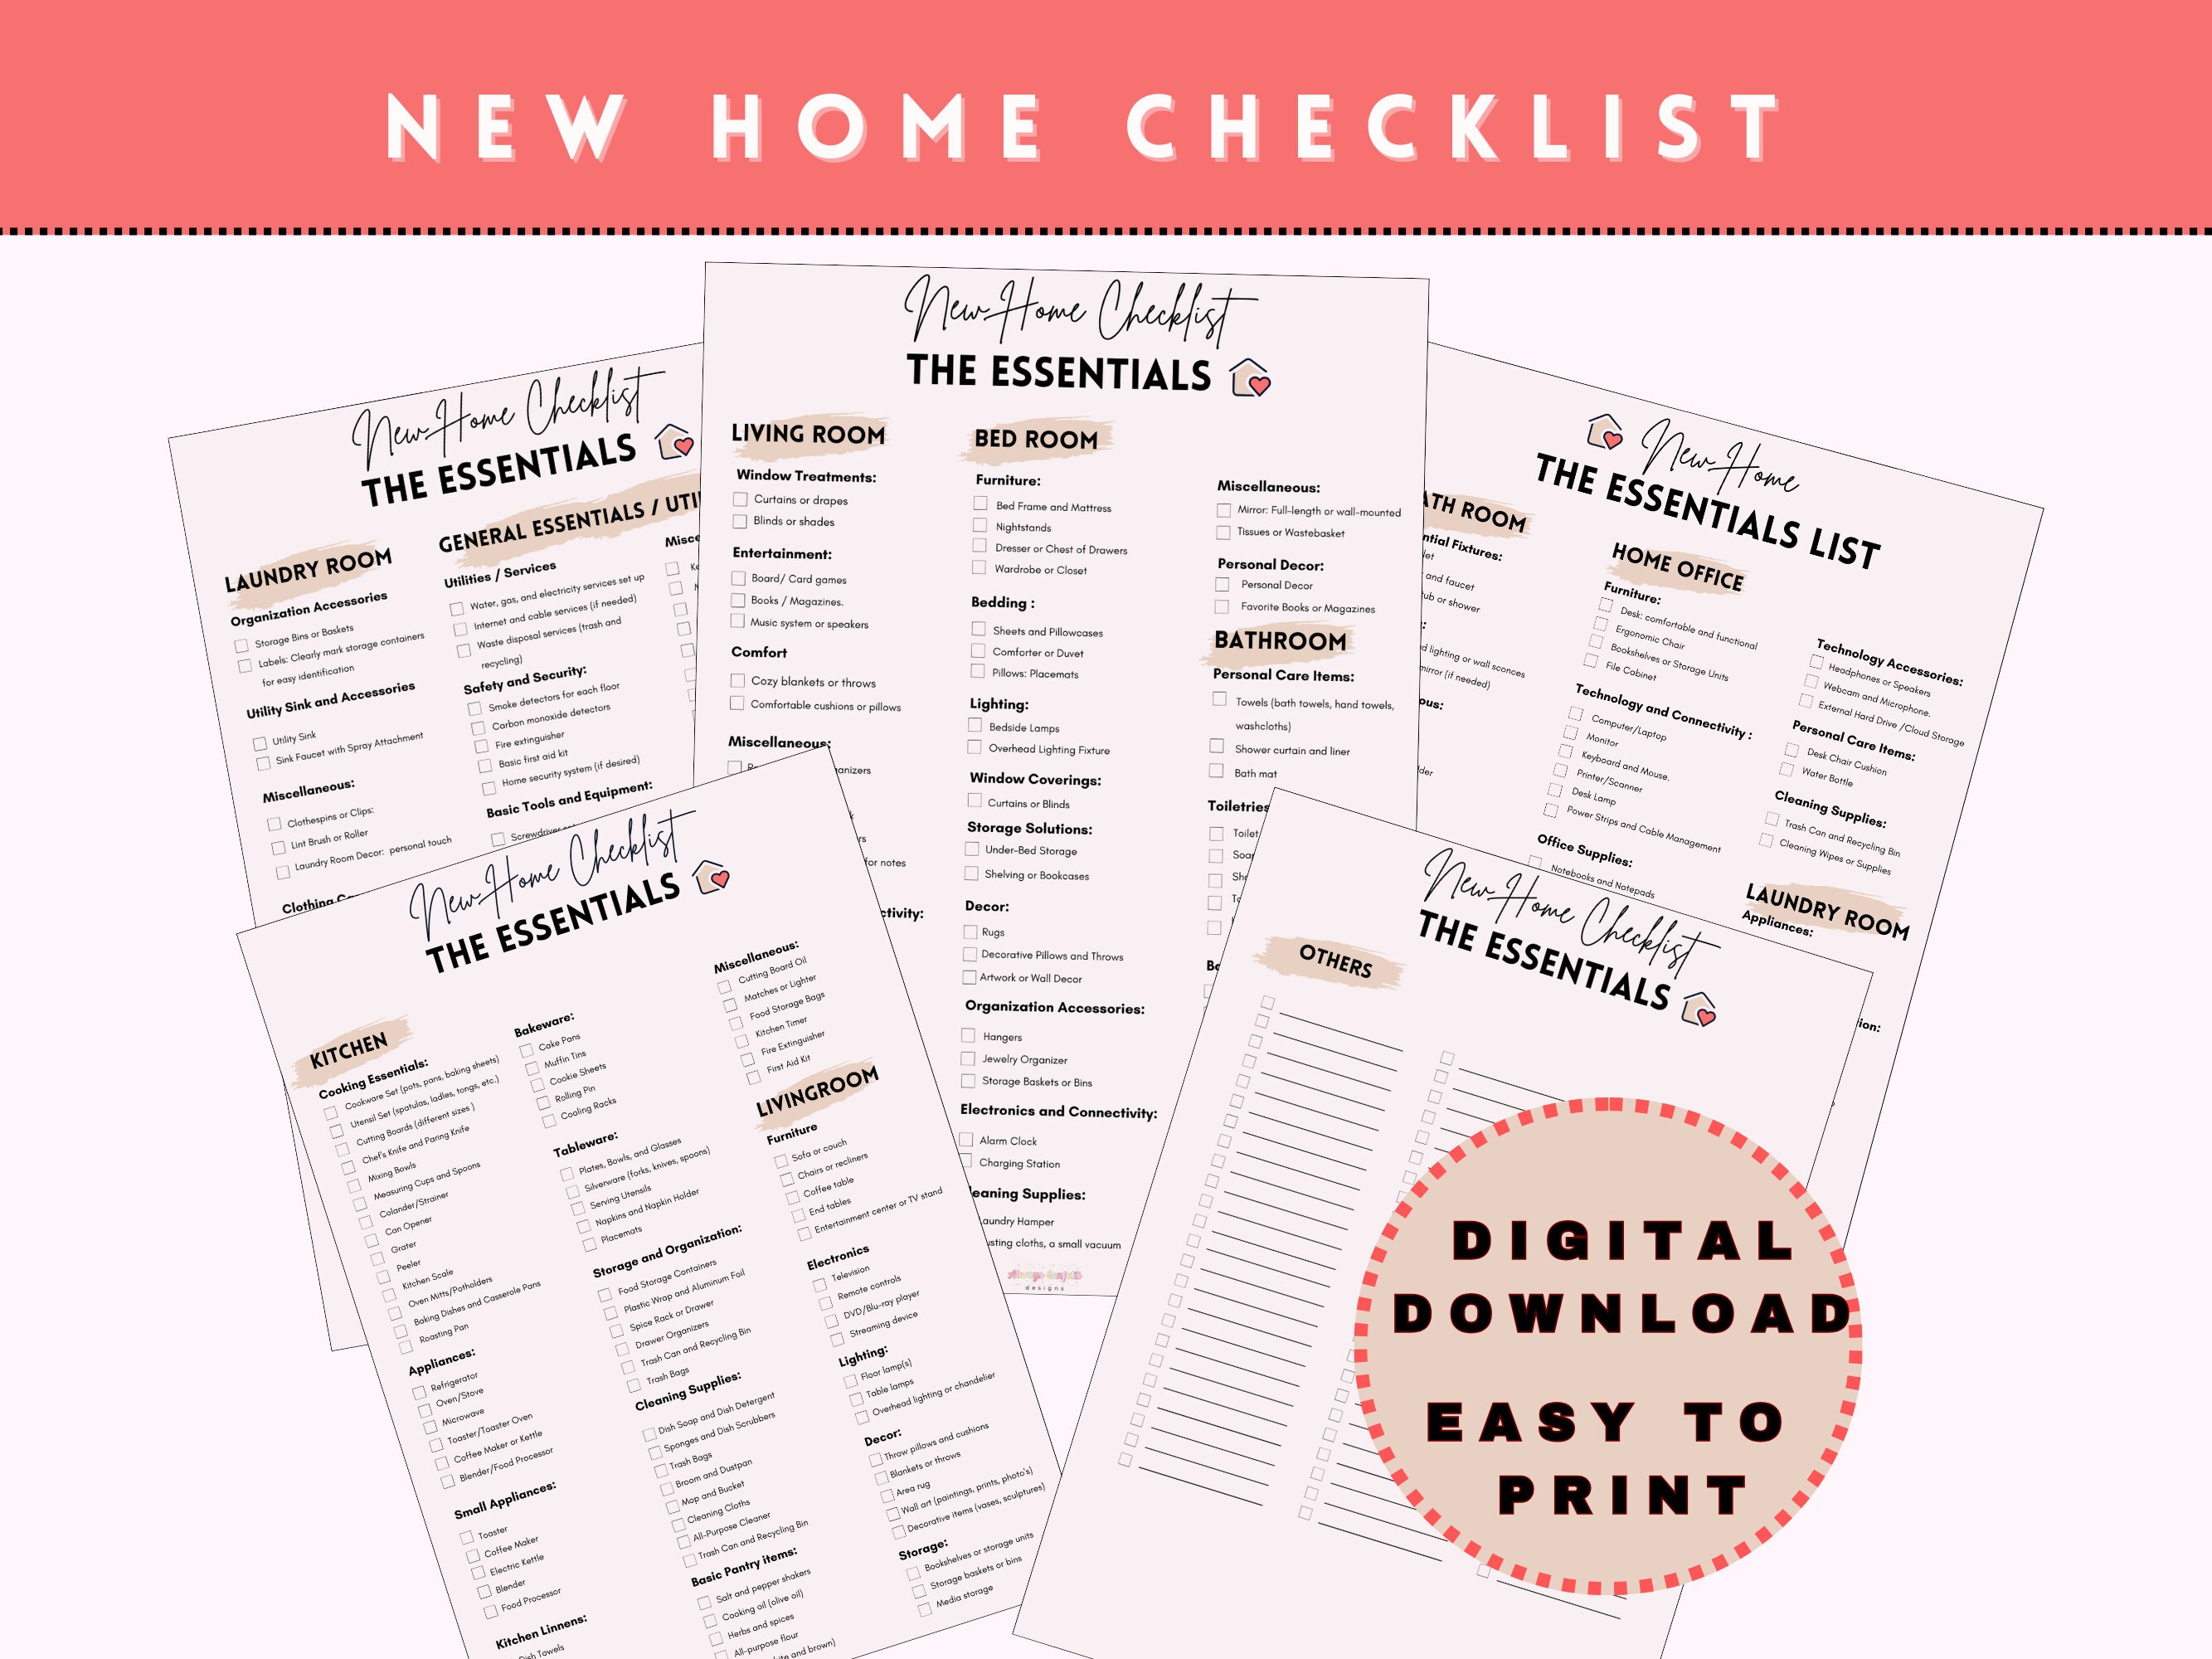 New Home Furniture Checklist: New Home by D.Damilan, Robert